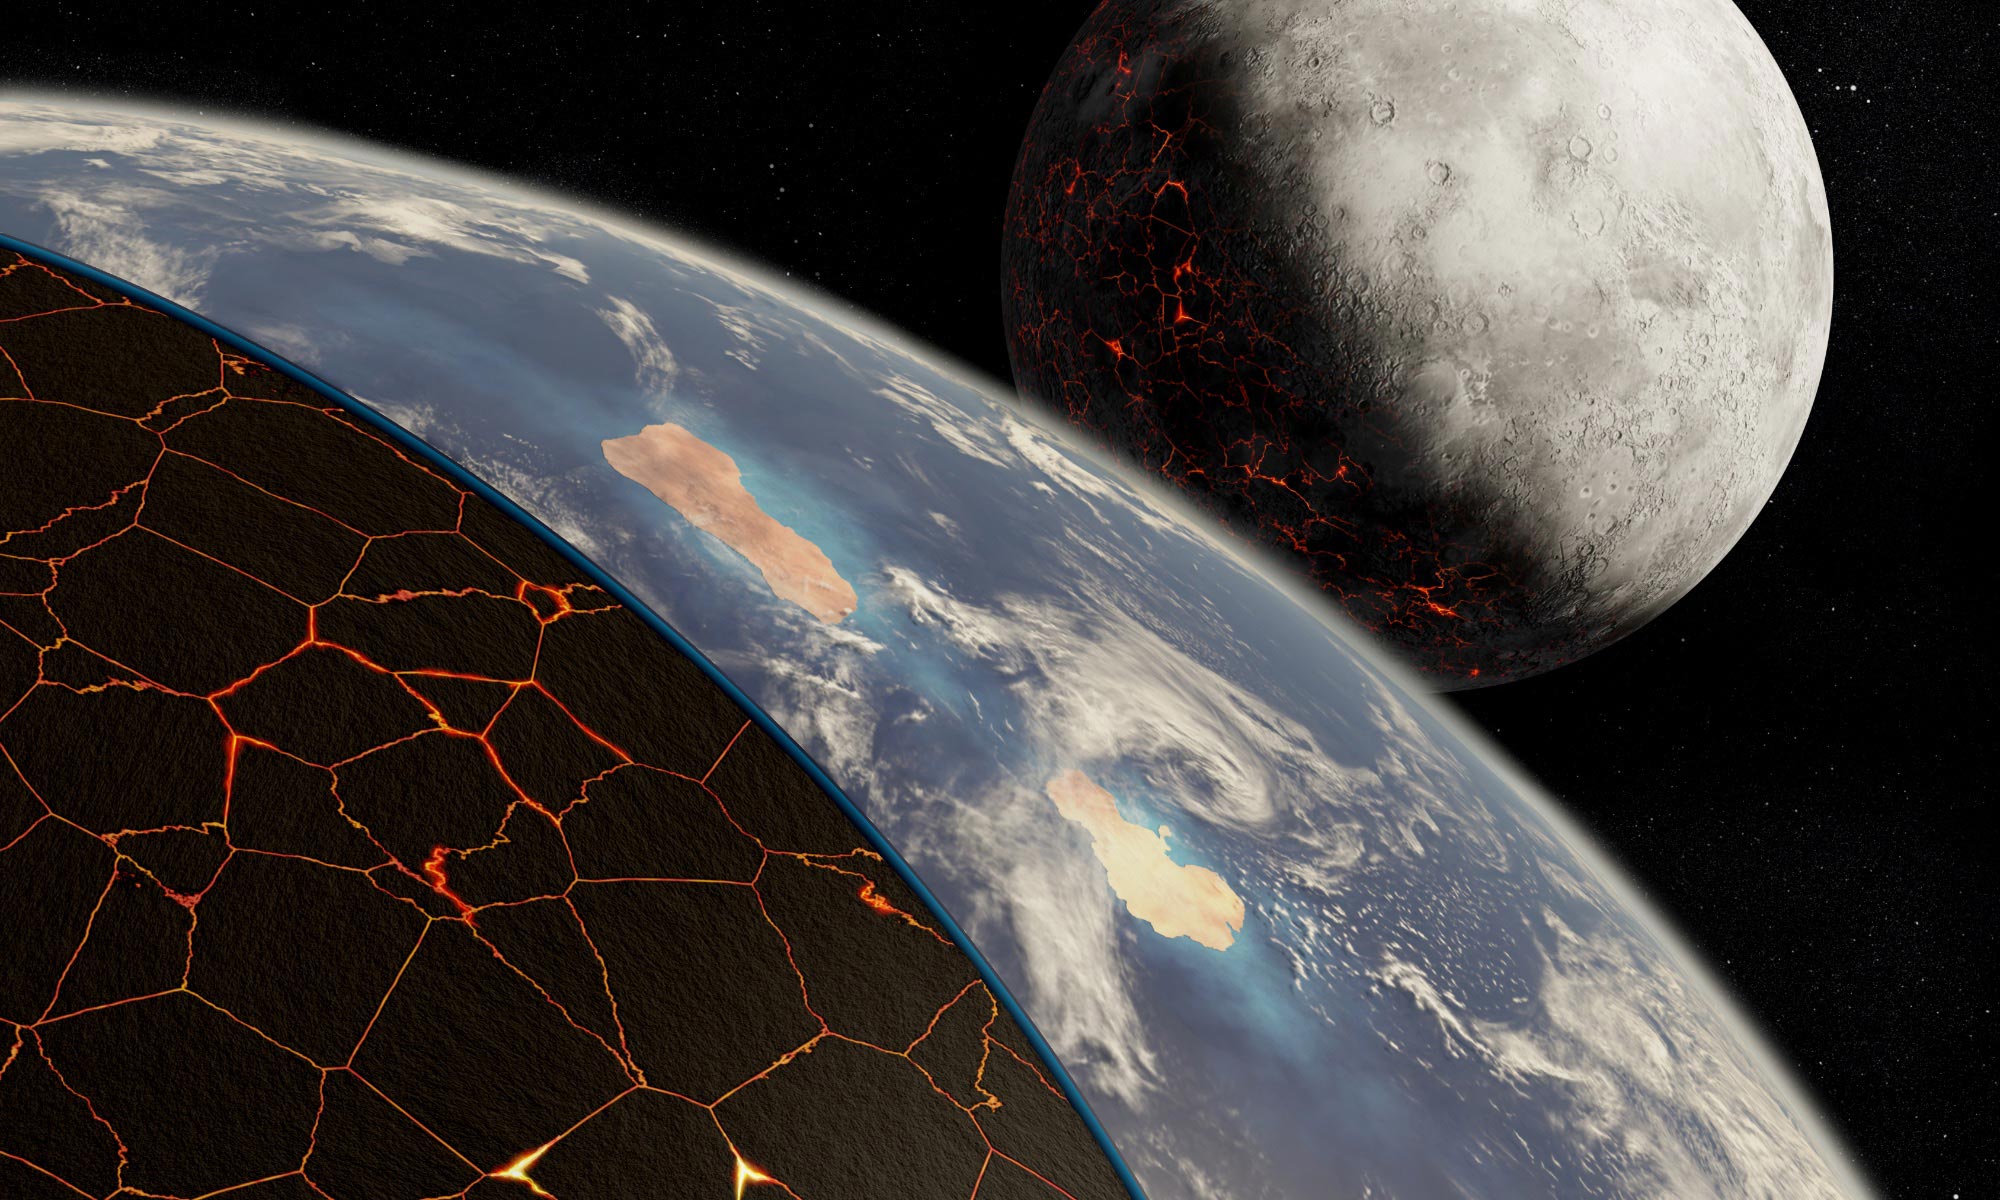 Life arose from “stagnant mantle,” not from plate tectonics